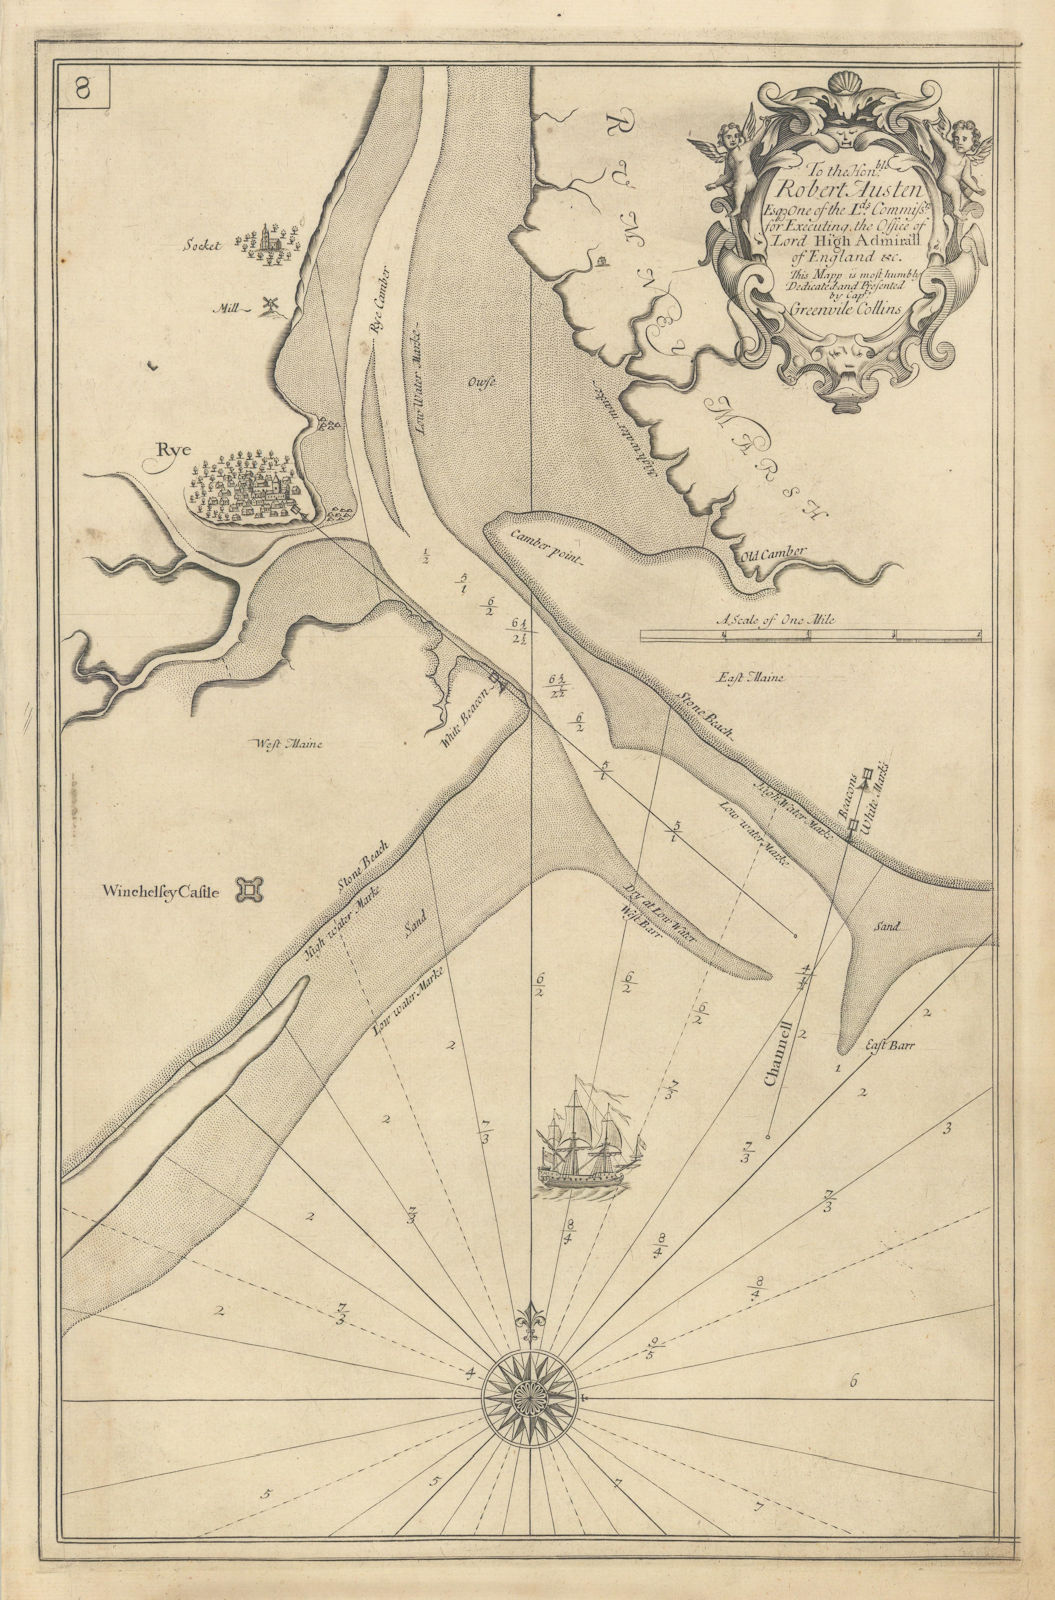 Rother Estuary, Rye & Winchelsea. Sea chart by Capt. Greenvile. COLLINS 1723 map